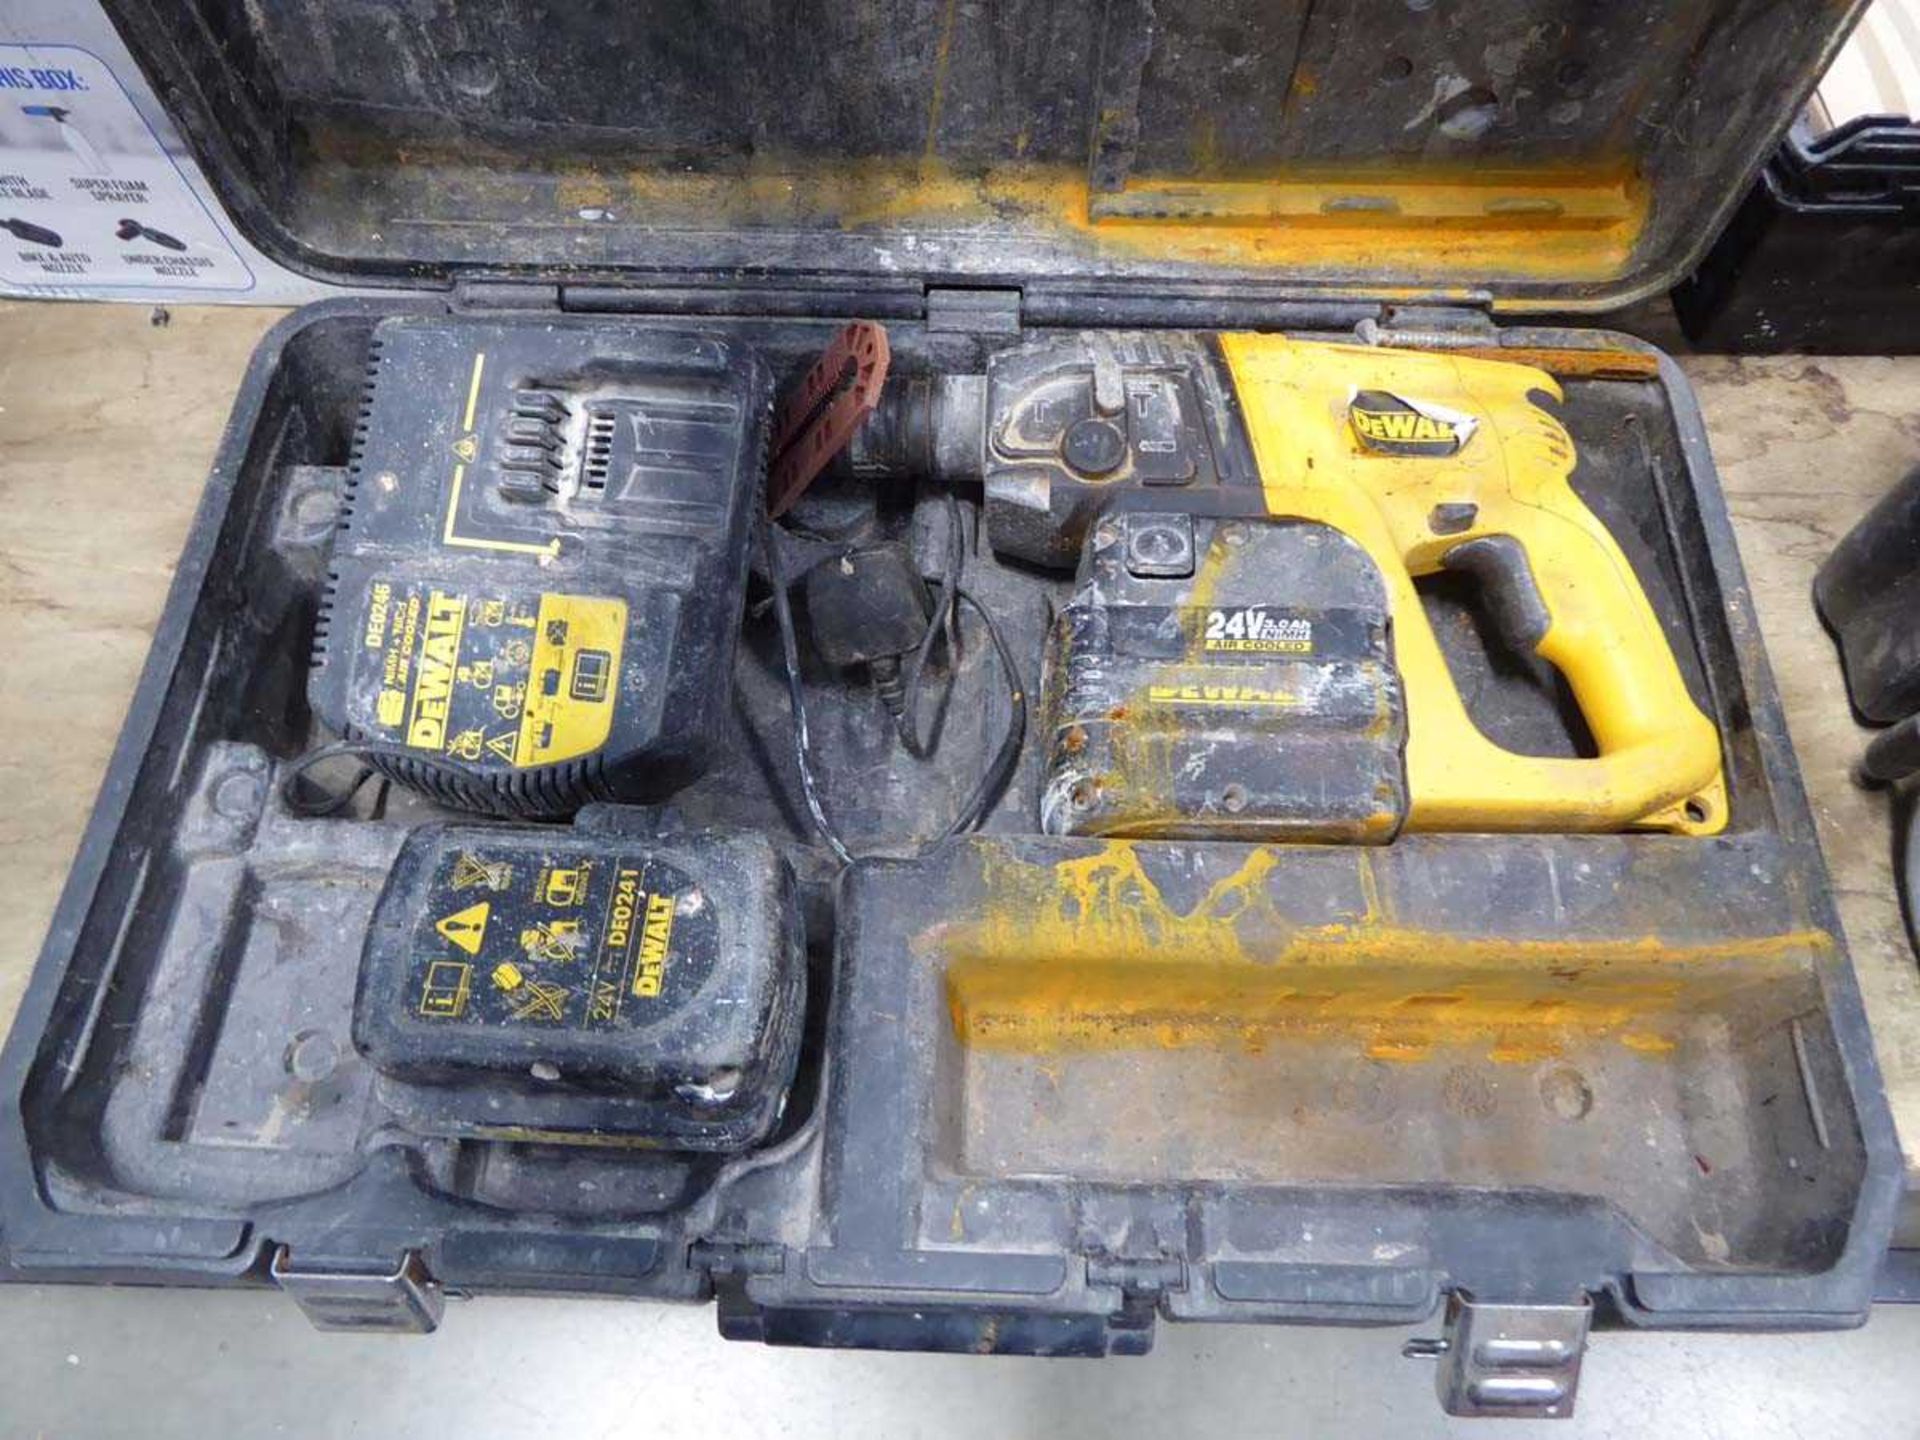 DeWalt SDS drill - 2 batteries and charger